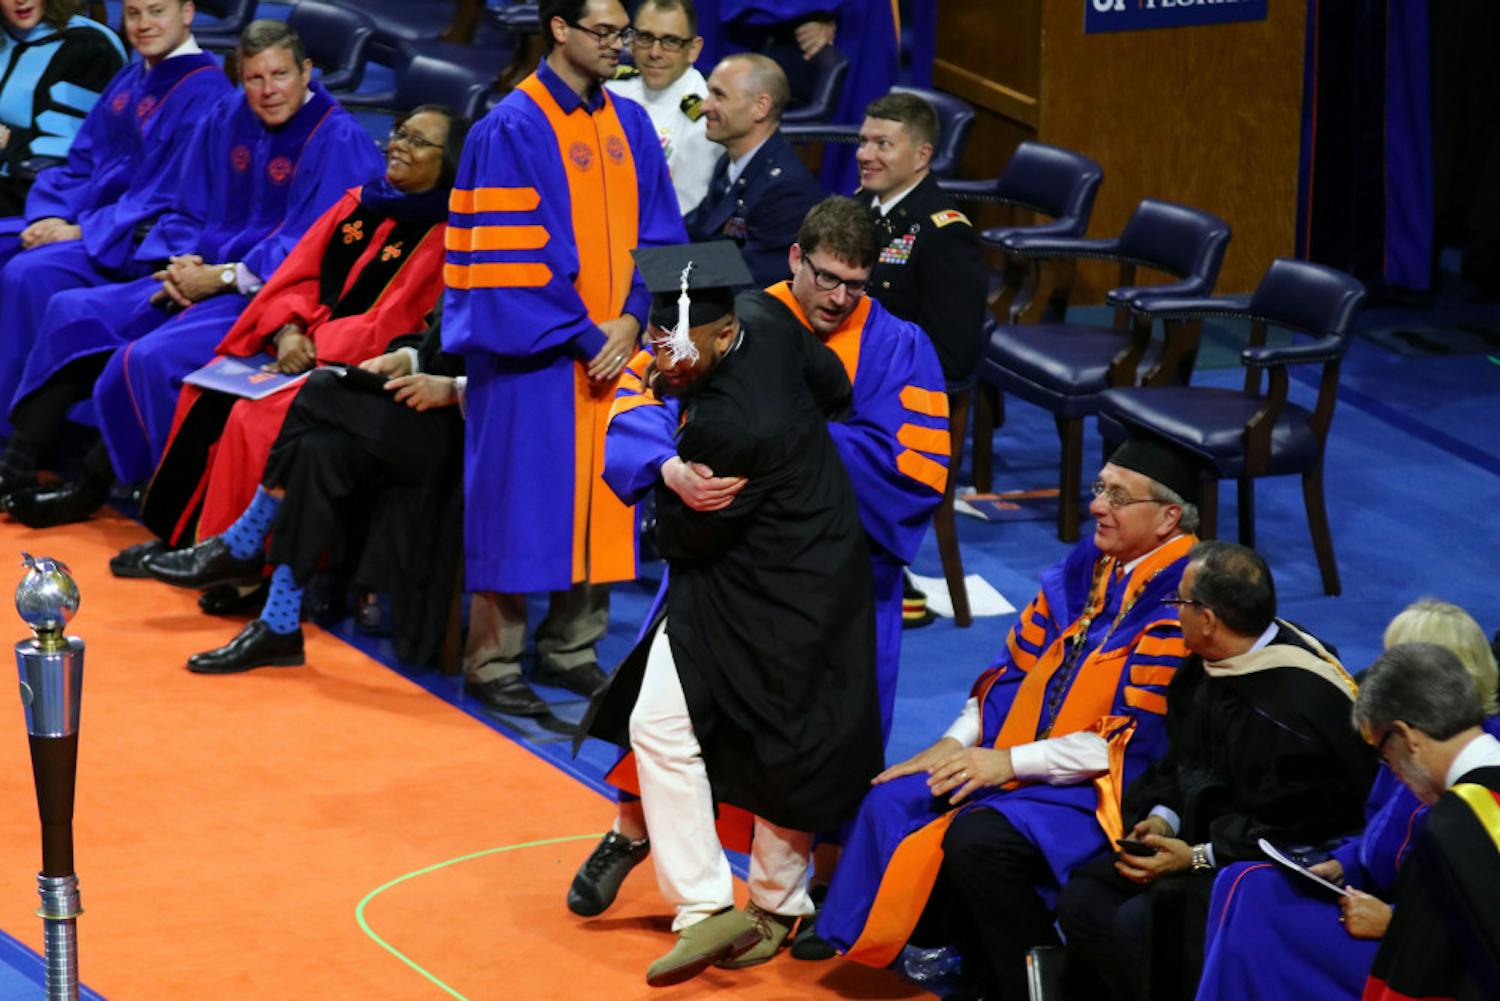 UF sent framed diplomas to the 24 students who were rushed off stage during the Spring commencement ceremony.